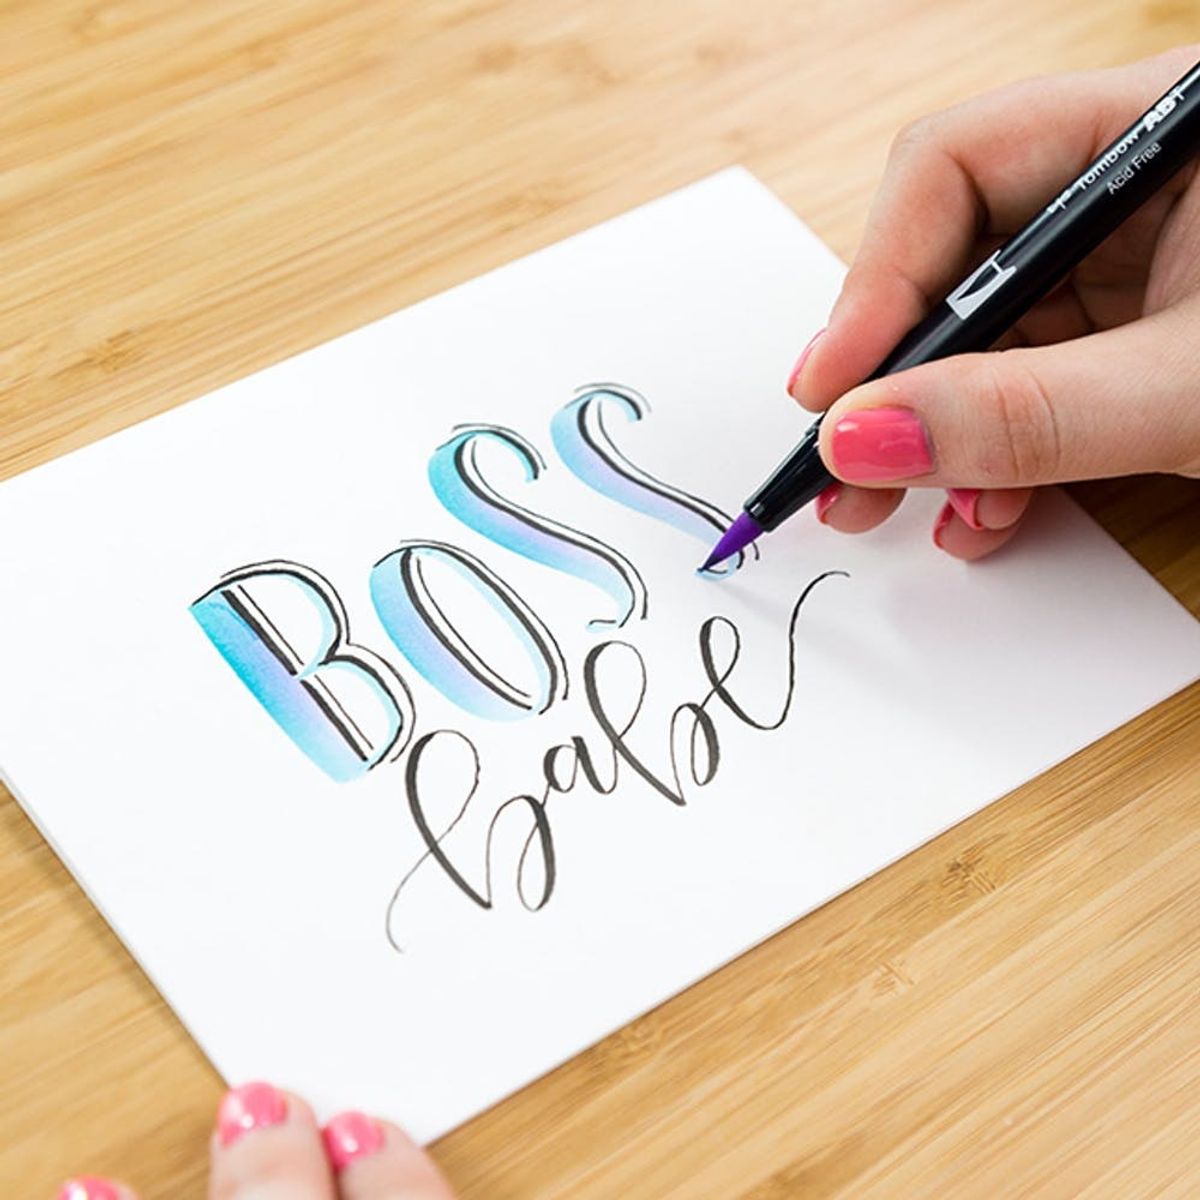 How Do You Do Bounce Lettering? Learn This Fun, Quirky Brush Lettering Style Today!